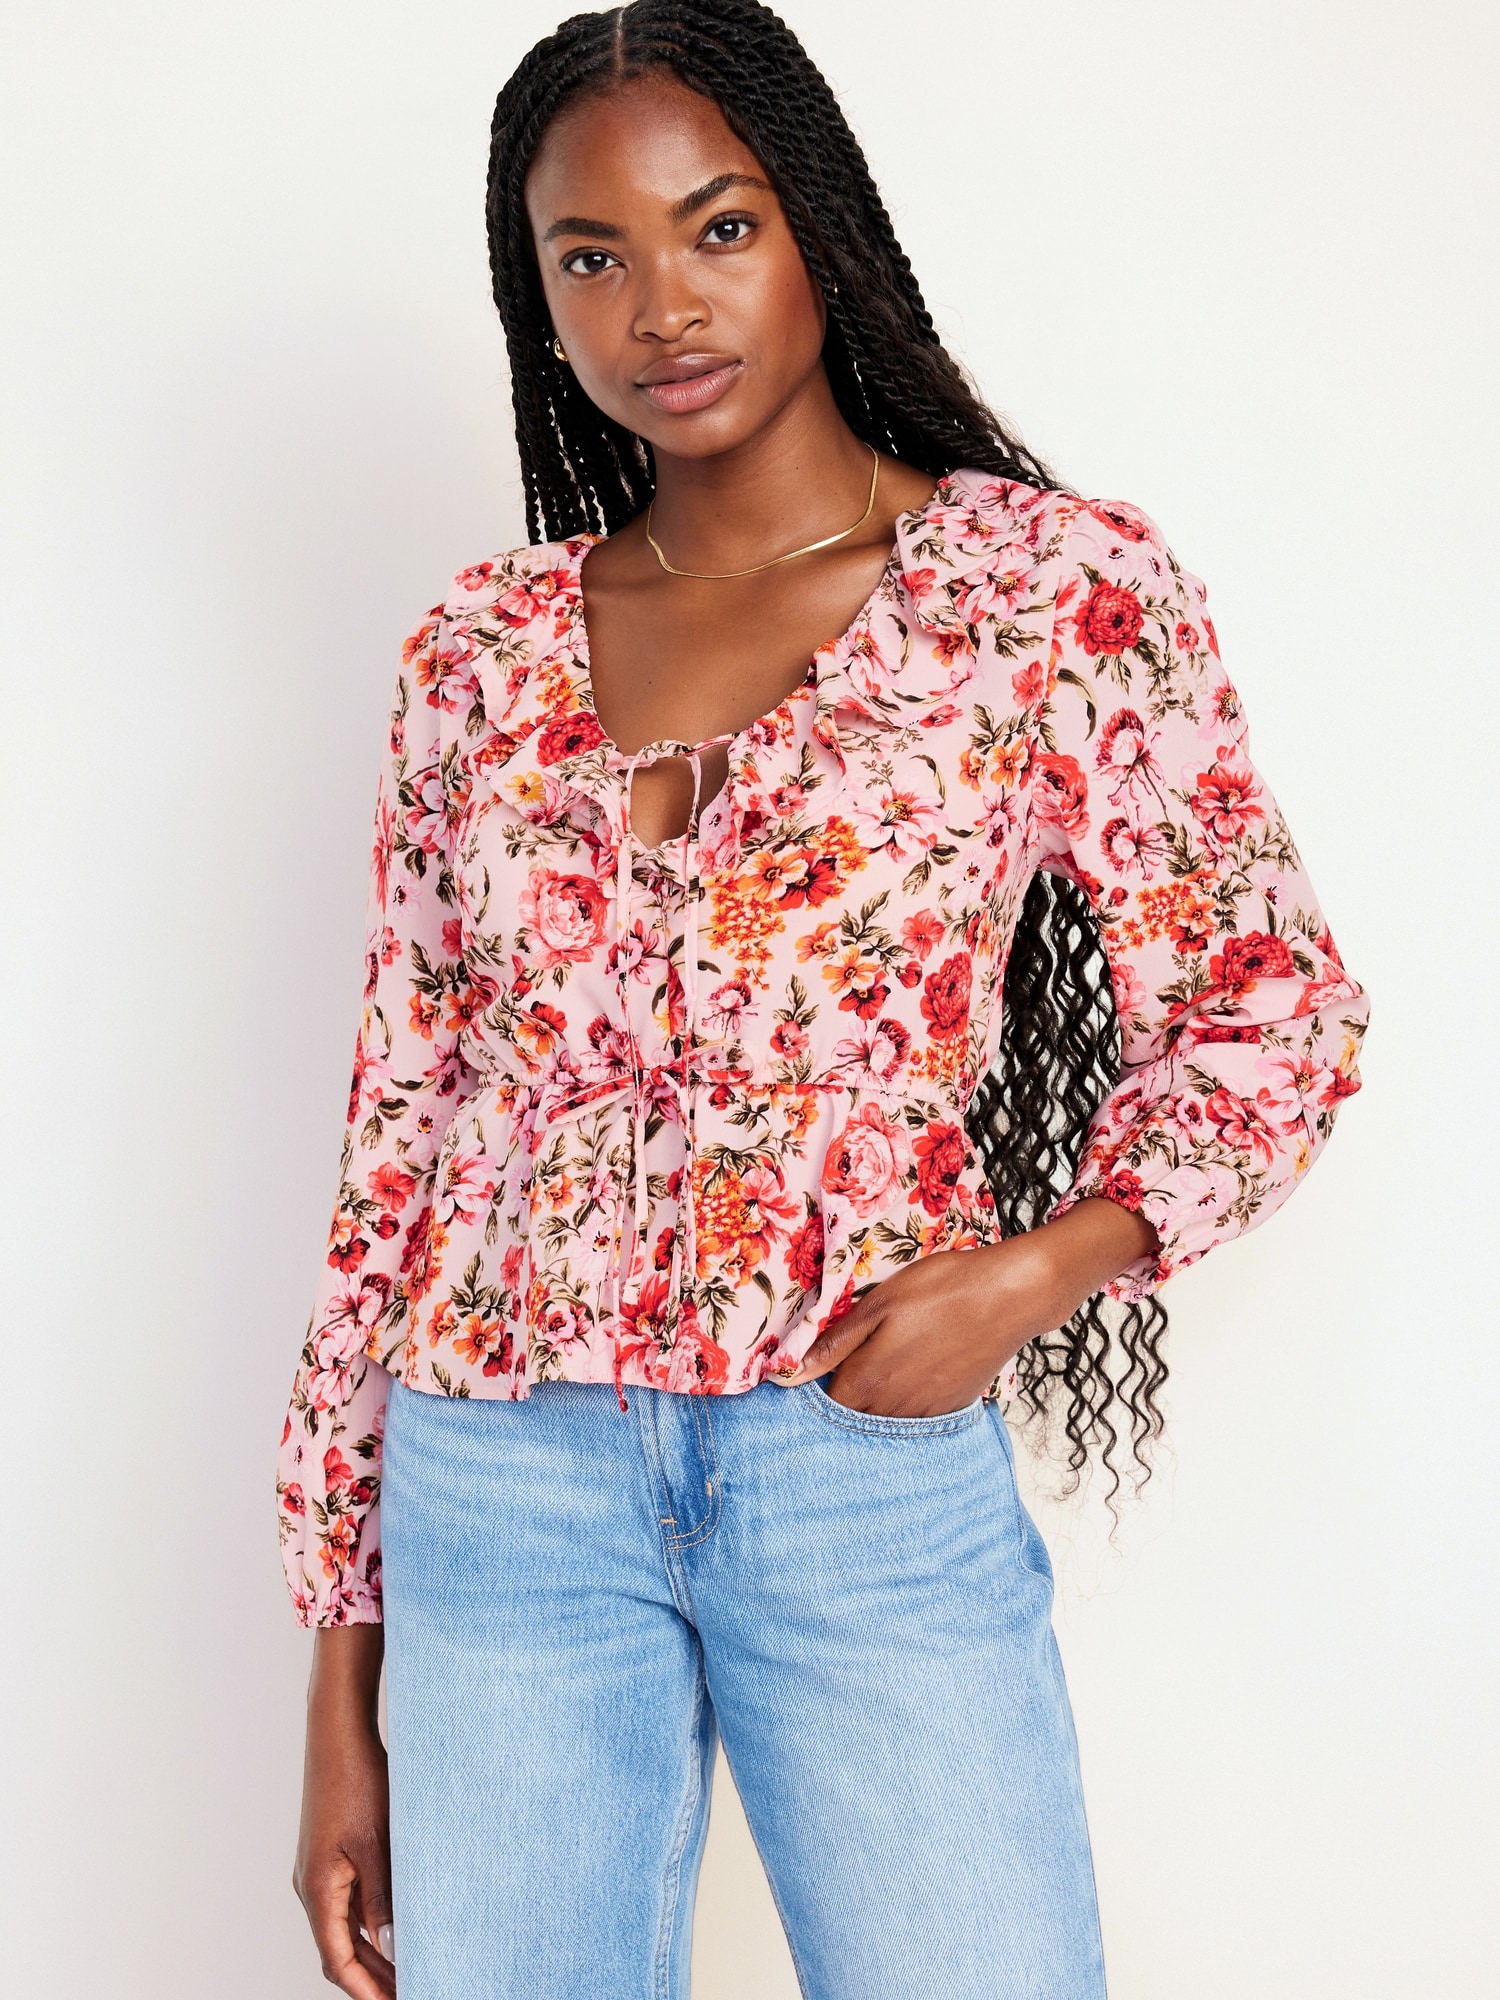 Floral Blouses for Women